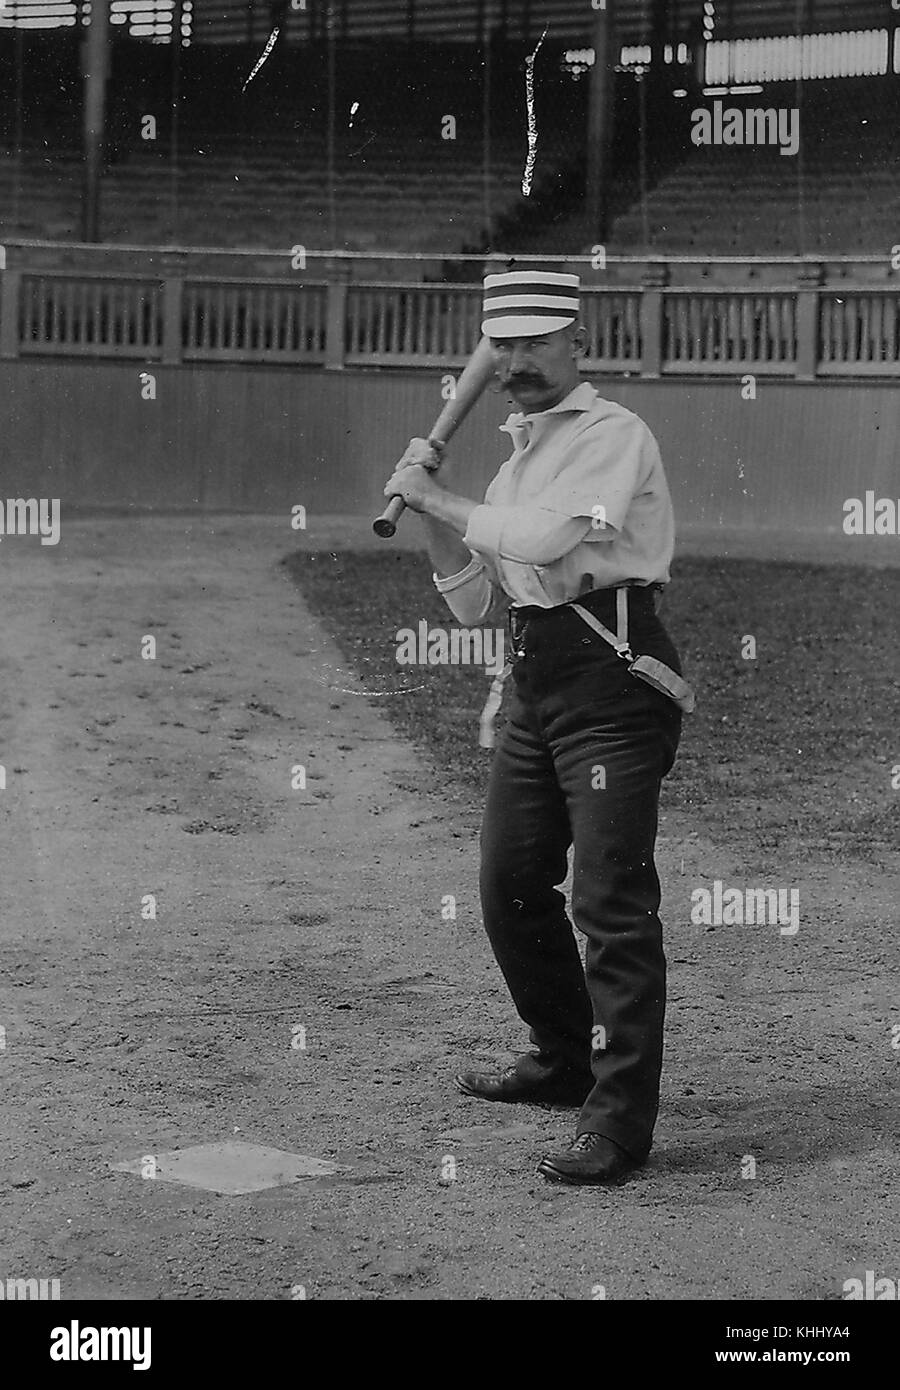 Portrait of Ed Andrews, right-handed second baseman and outfielder over parts of eight seasons (18841891), in Philadelphia Quakers uniform, in the field, holding a bat, in hitting pose, photograph by Gross and Company, 1900. From the New York Public Library. Stock Photo